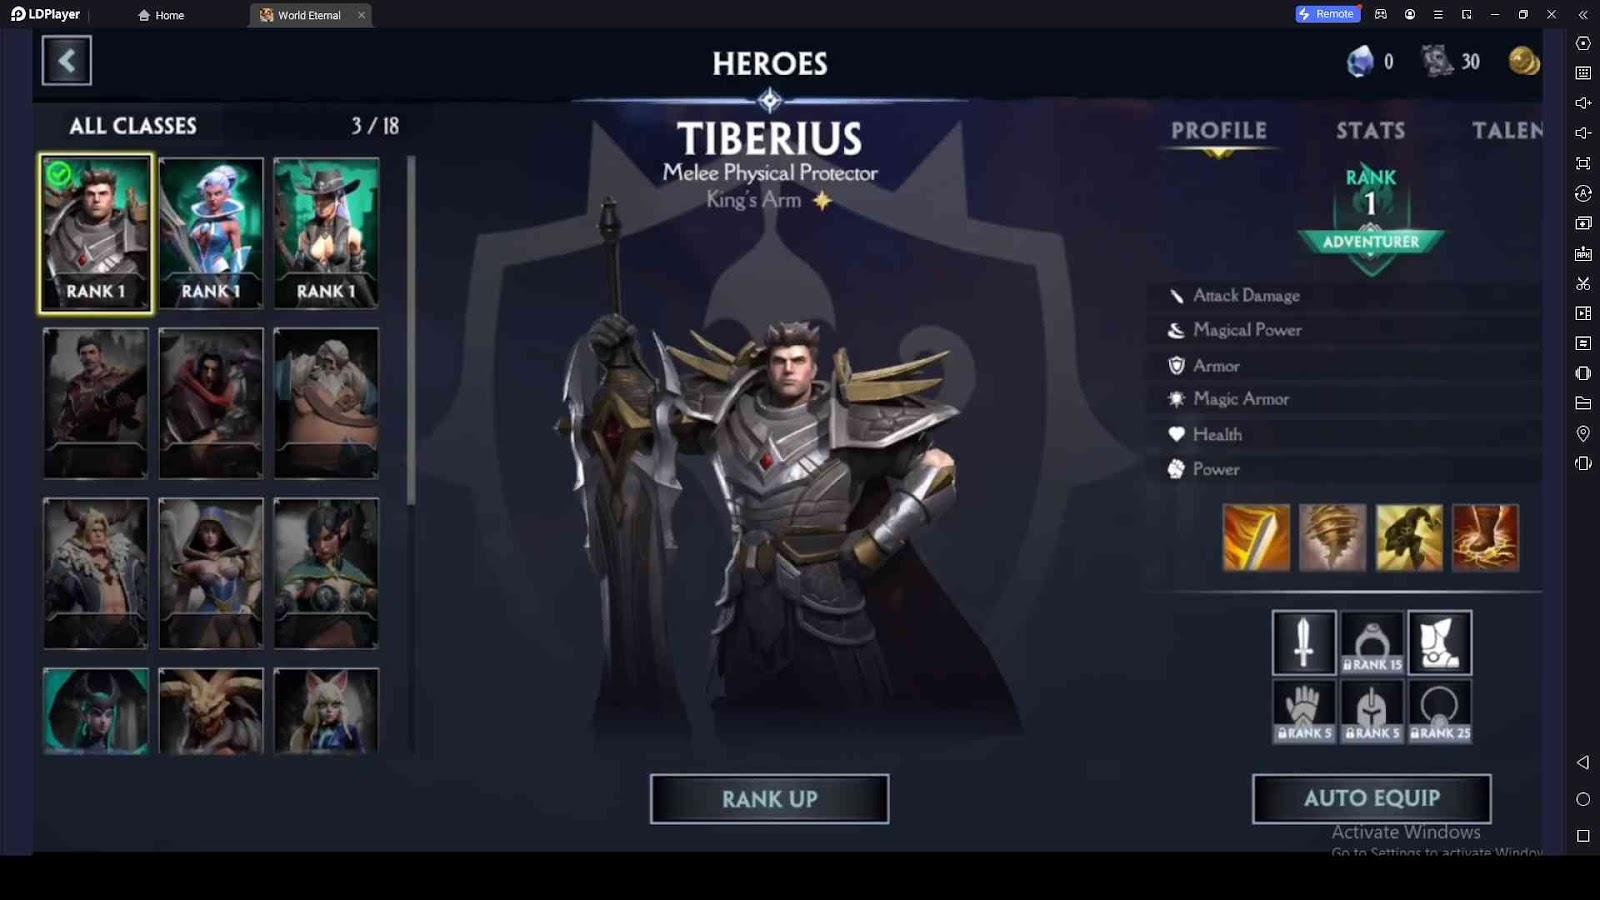 Promote the Rank of Your Hero